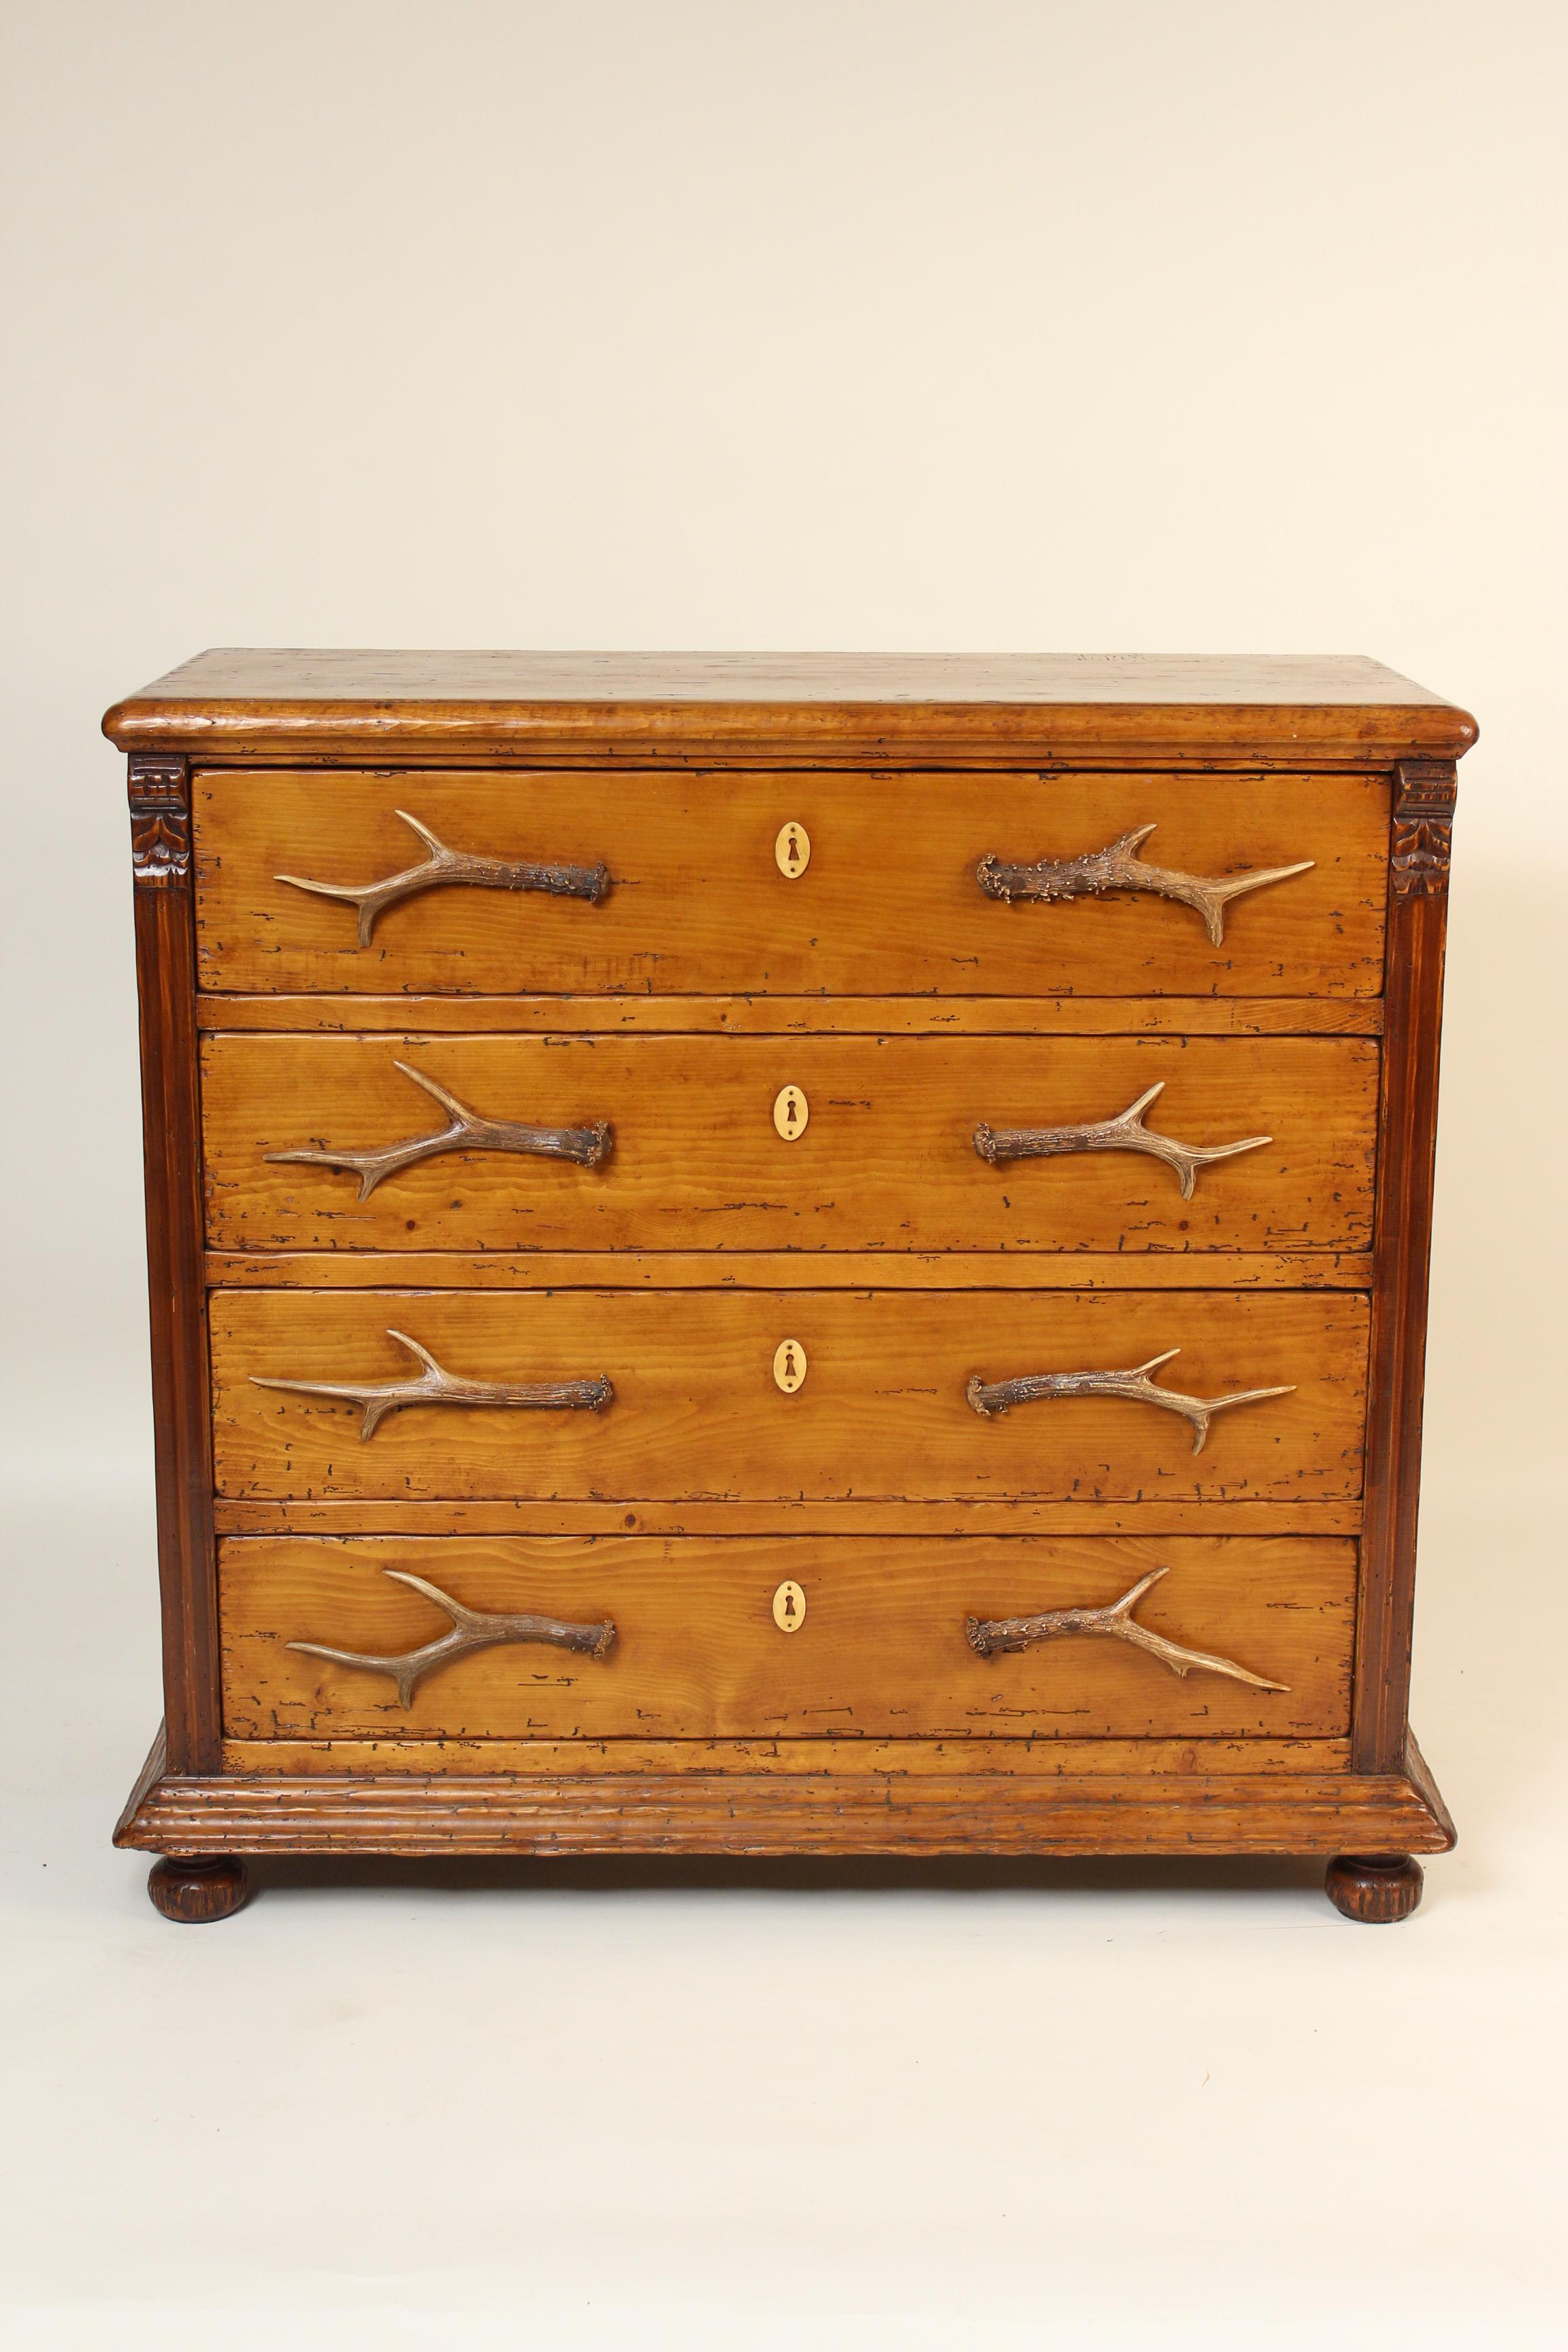 Victorian style pine chest of drawers with deer antler pulls, made from antique pine by Van Thiel & Company, early 21st century. This chest was made from antique pine in China under European management. This chest would be a great addition to either